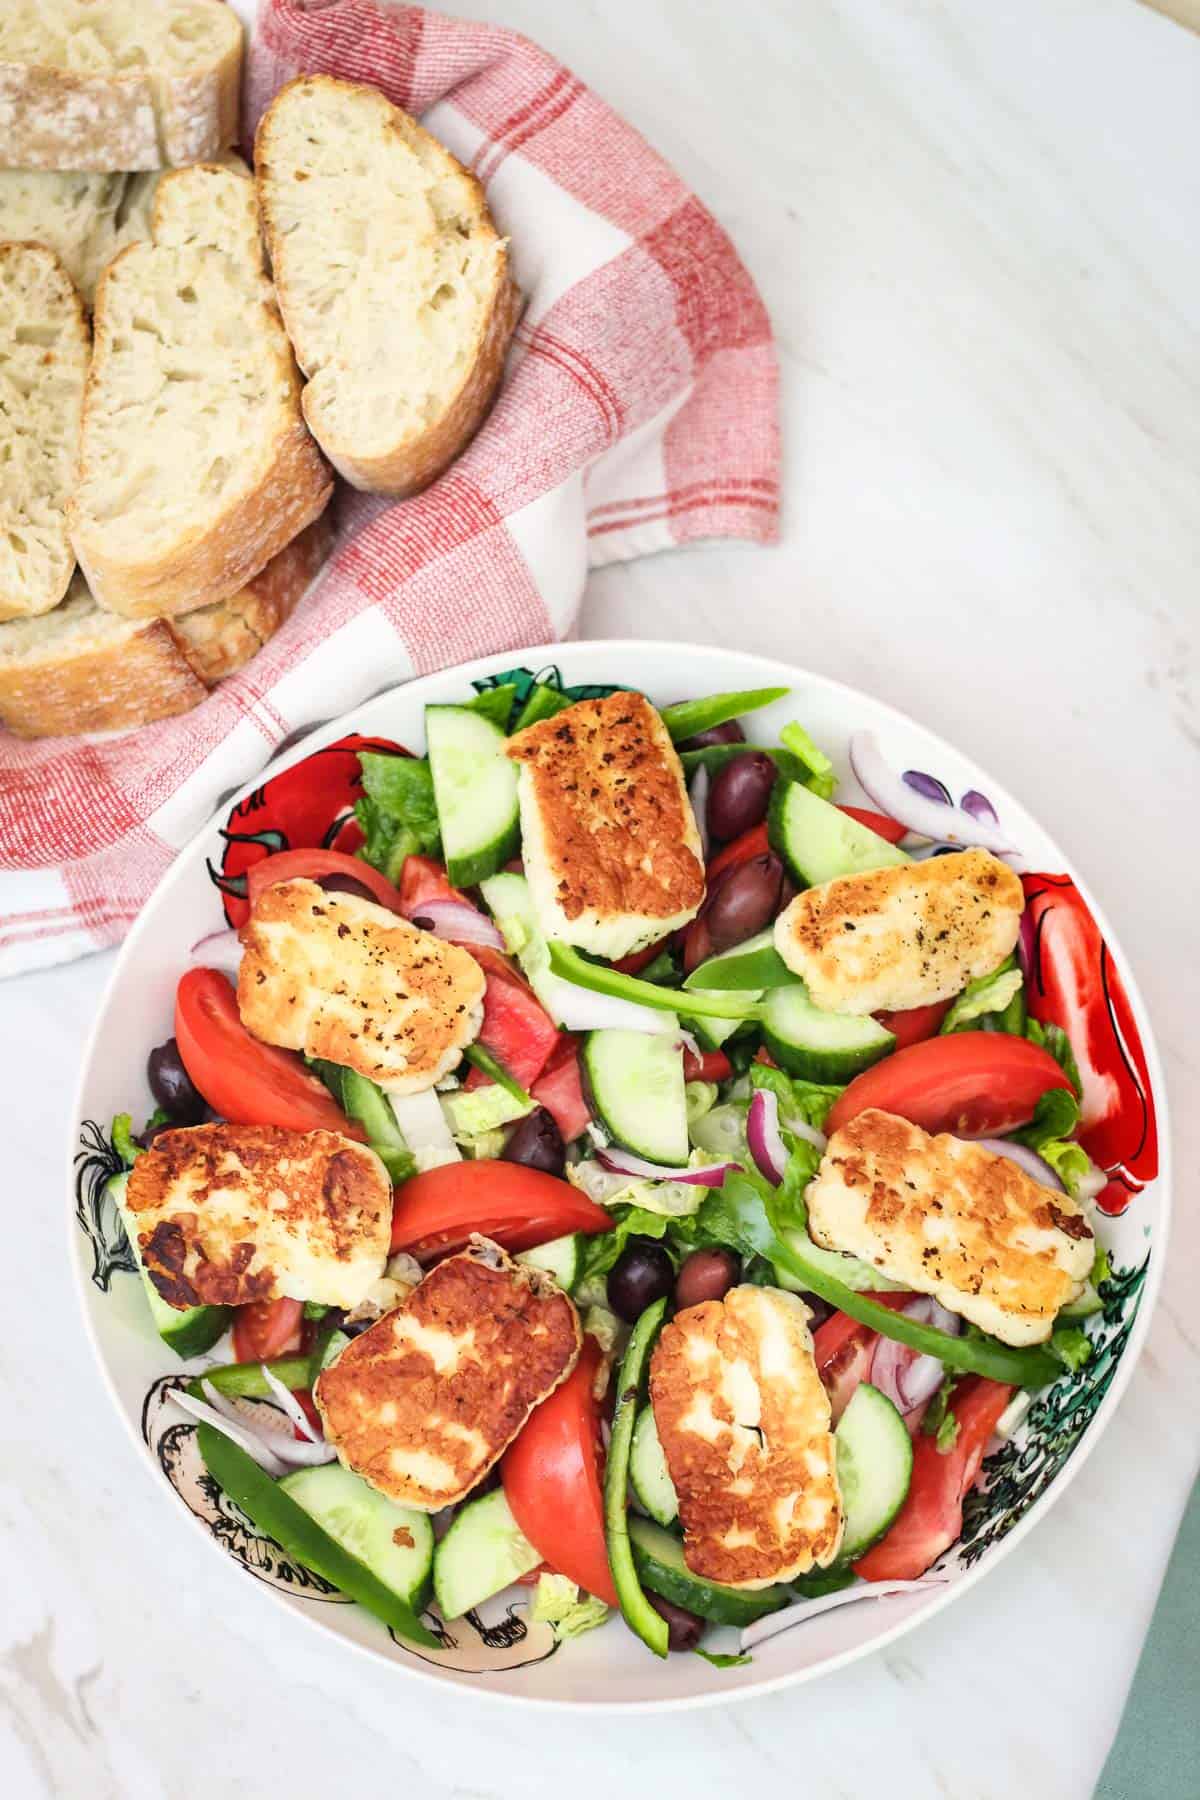 A platter of big family style salad topped with fried halloumi cheese shown next to a basket of fresh bread.